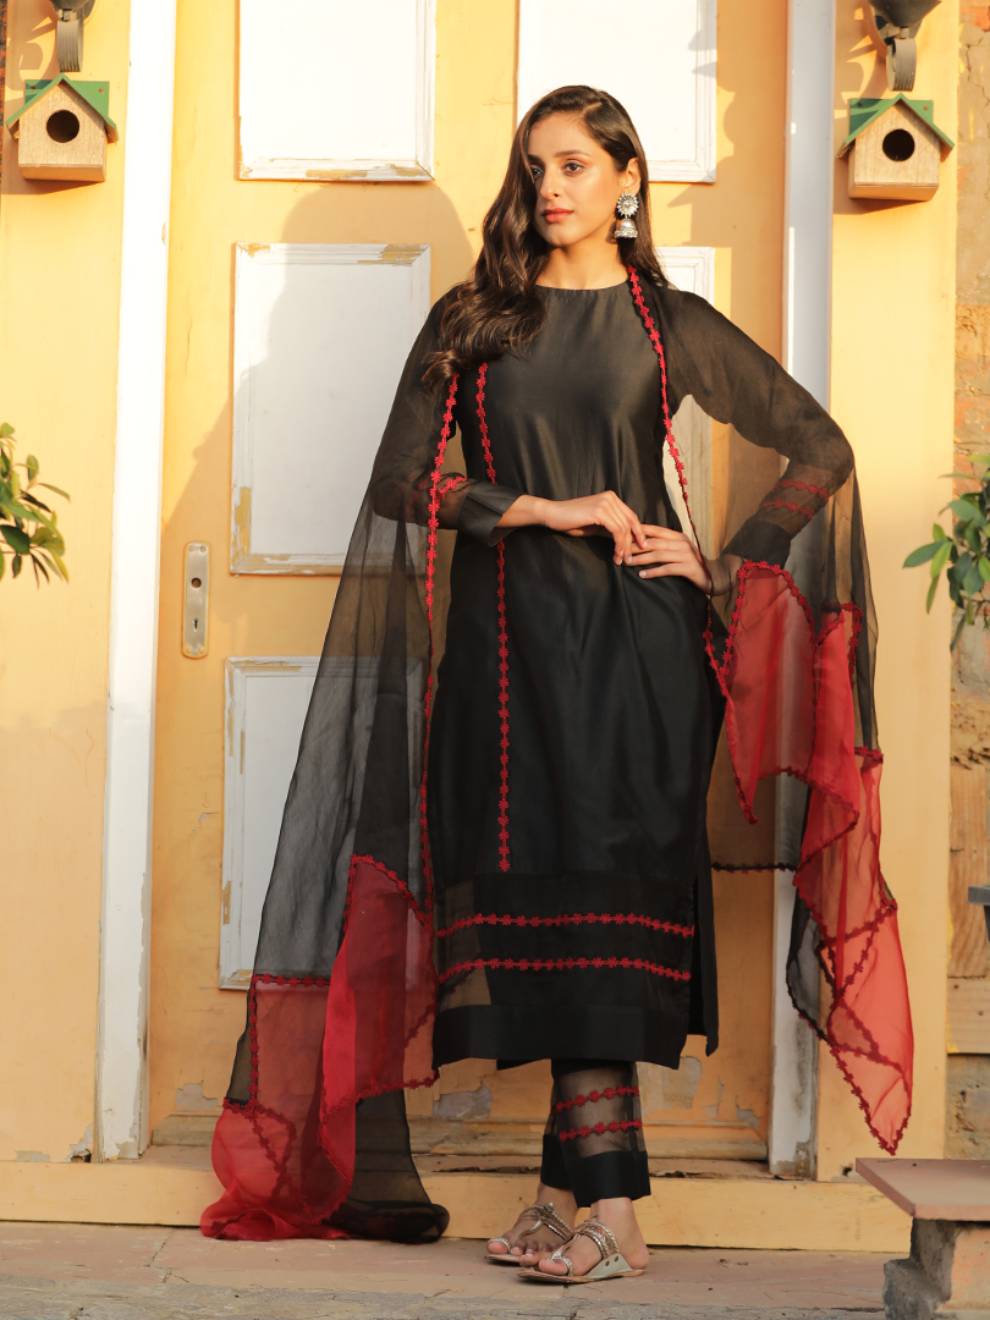 Buy Devi Icon Red and Black Color Printed Unstitched Salwar Suit Material  at Amazon.in